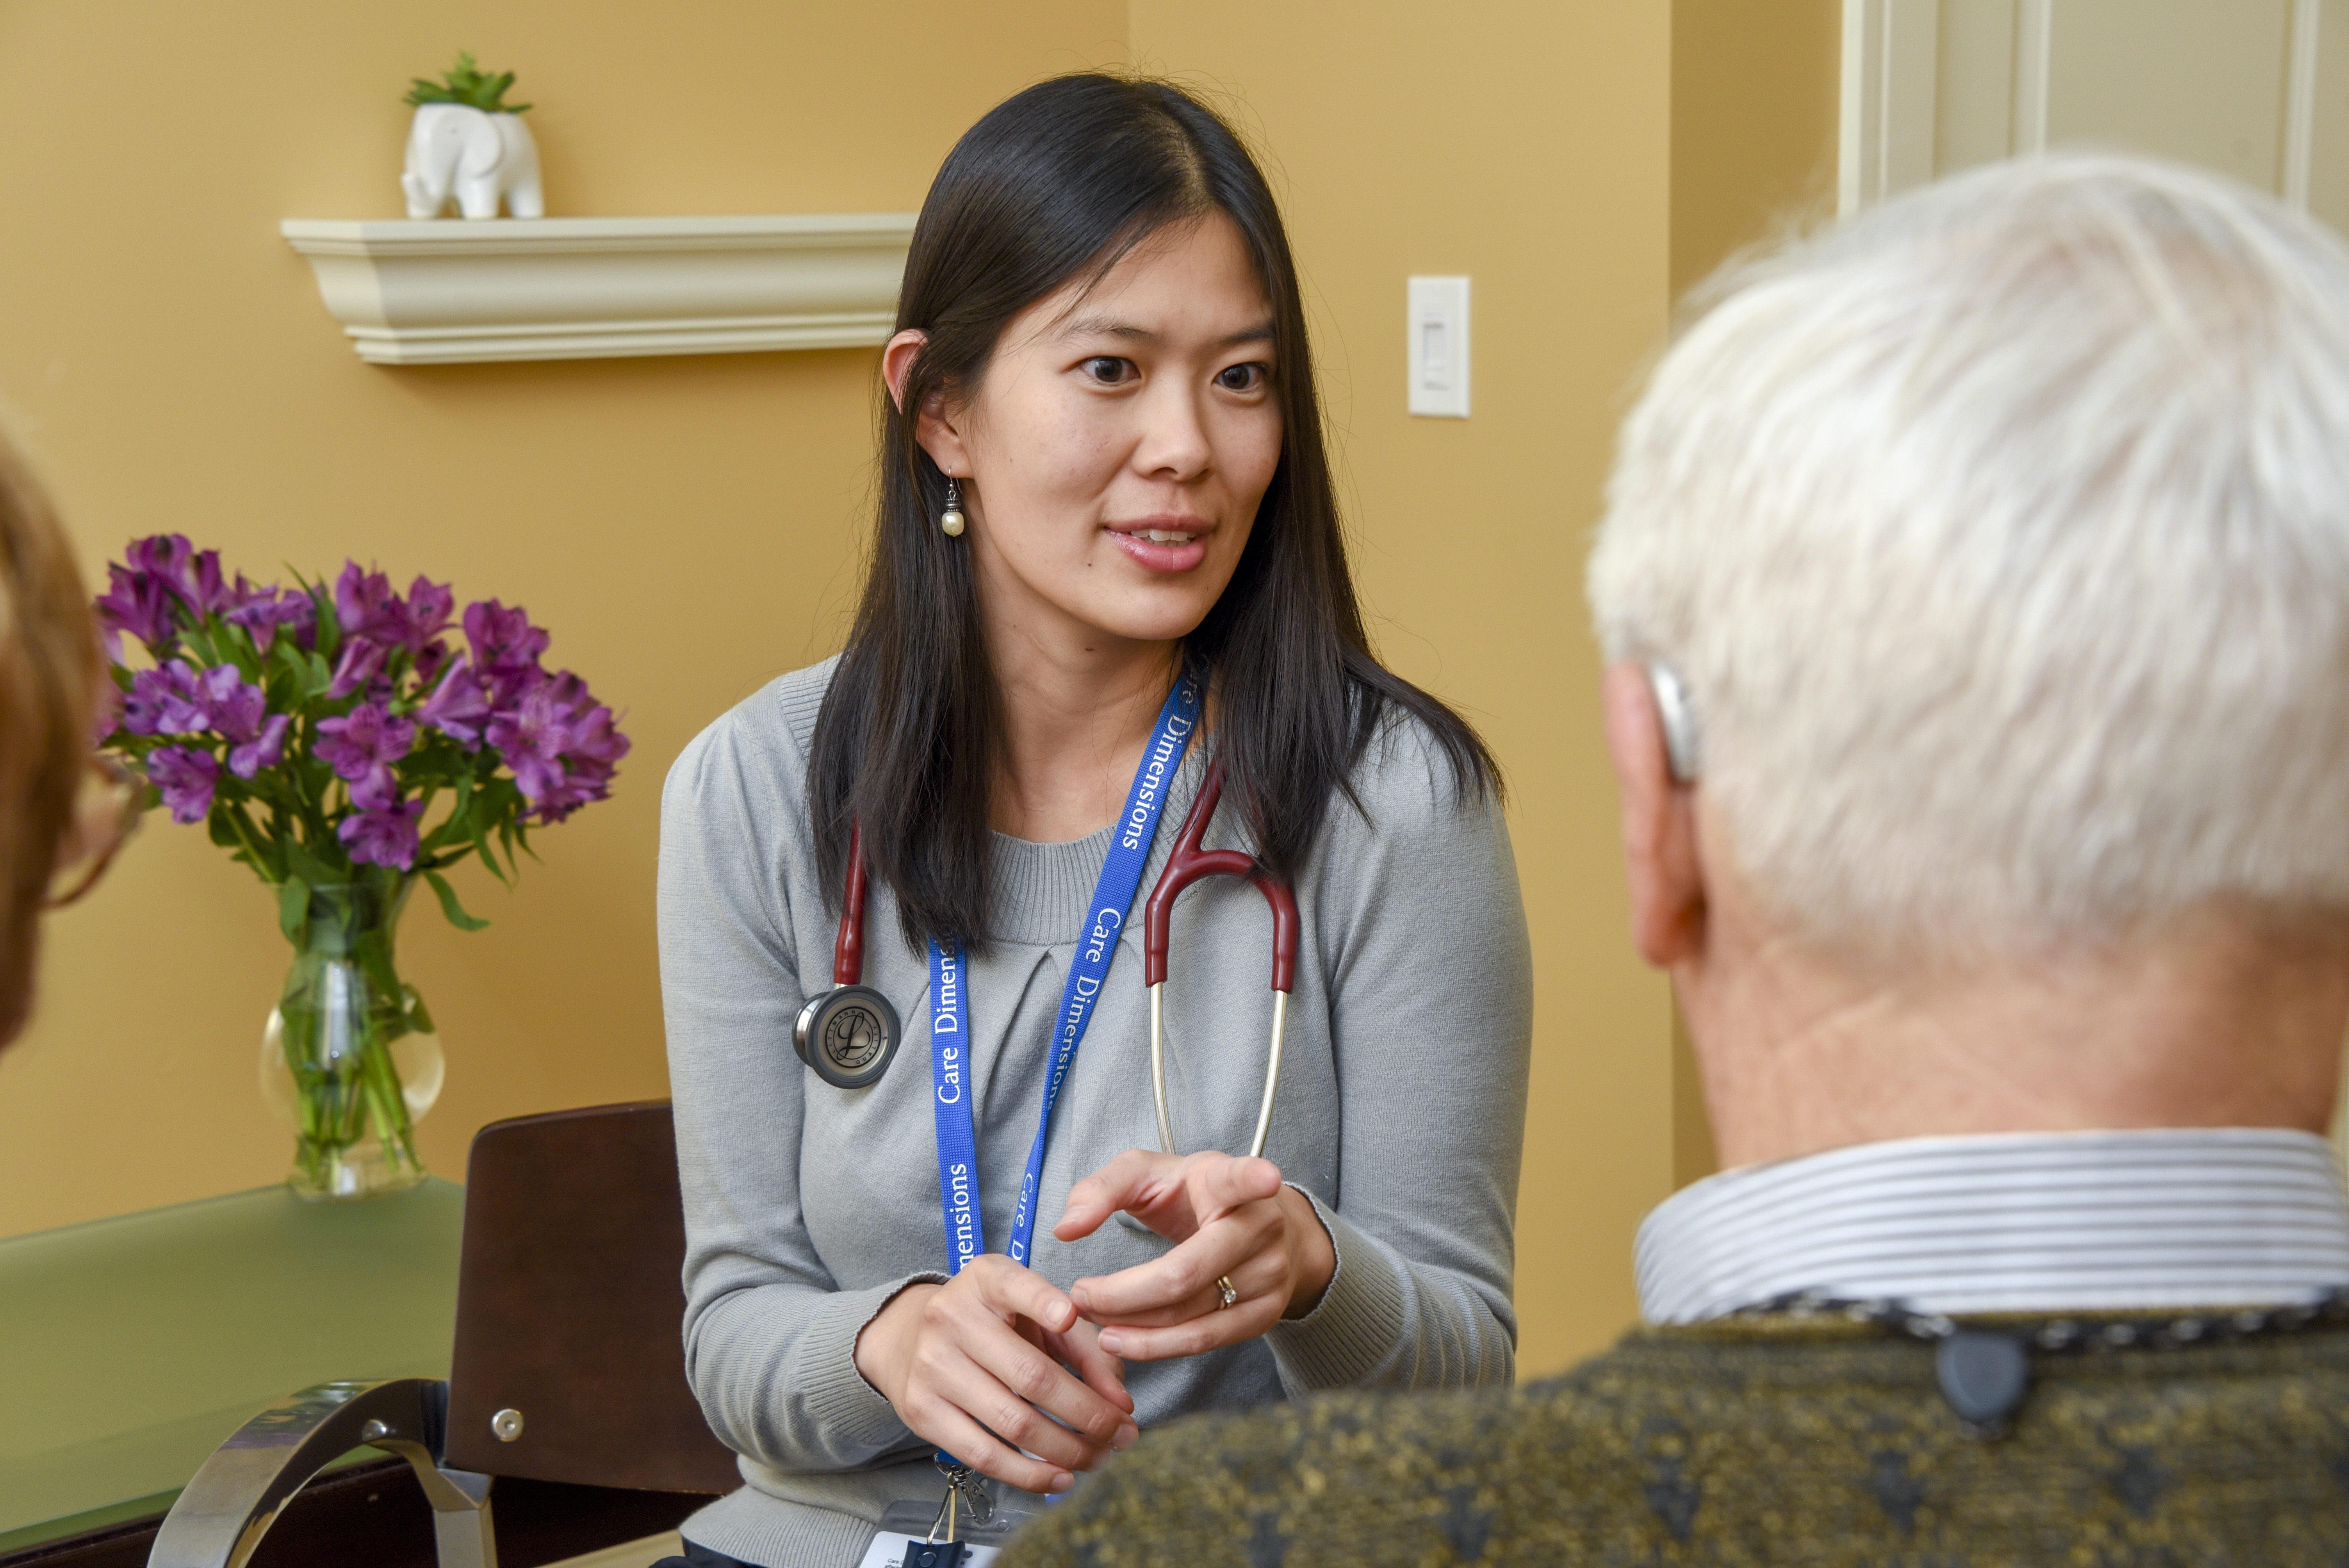 Care Dimensions Hospice and Palliative Care Physician Anna Chon, MD, discusses care options with a patient.